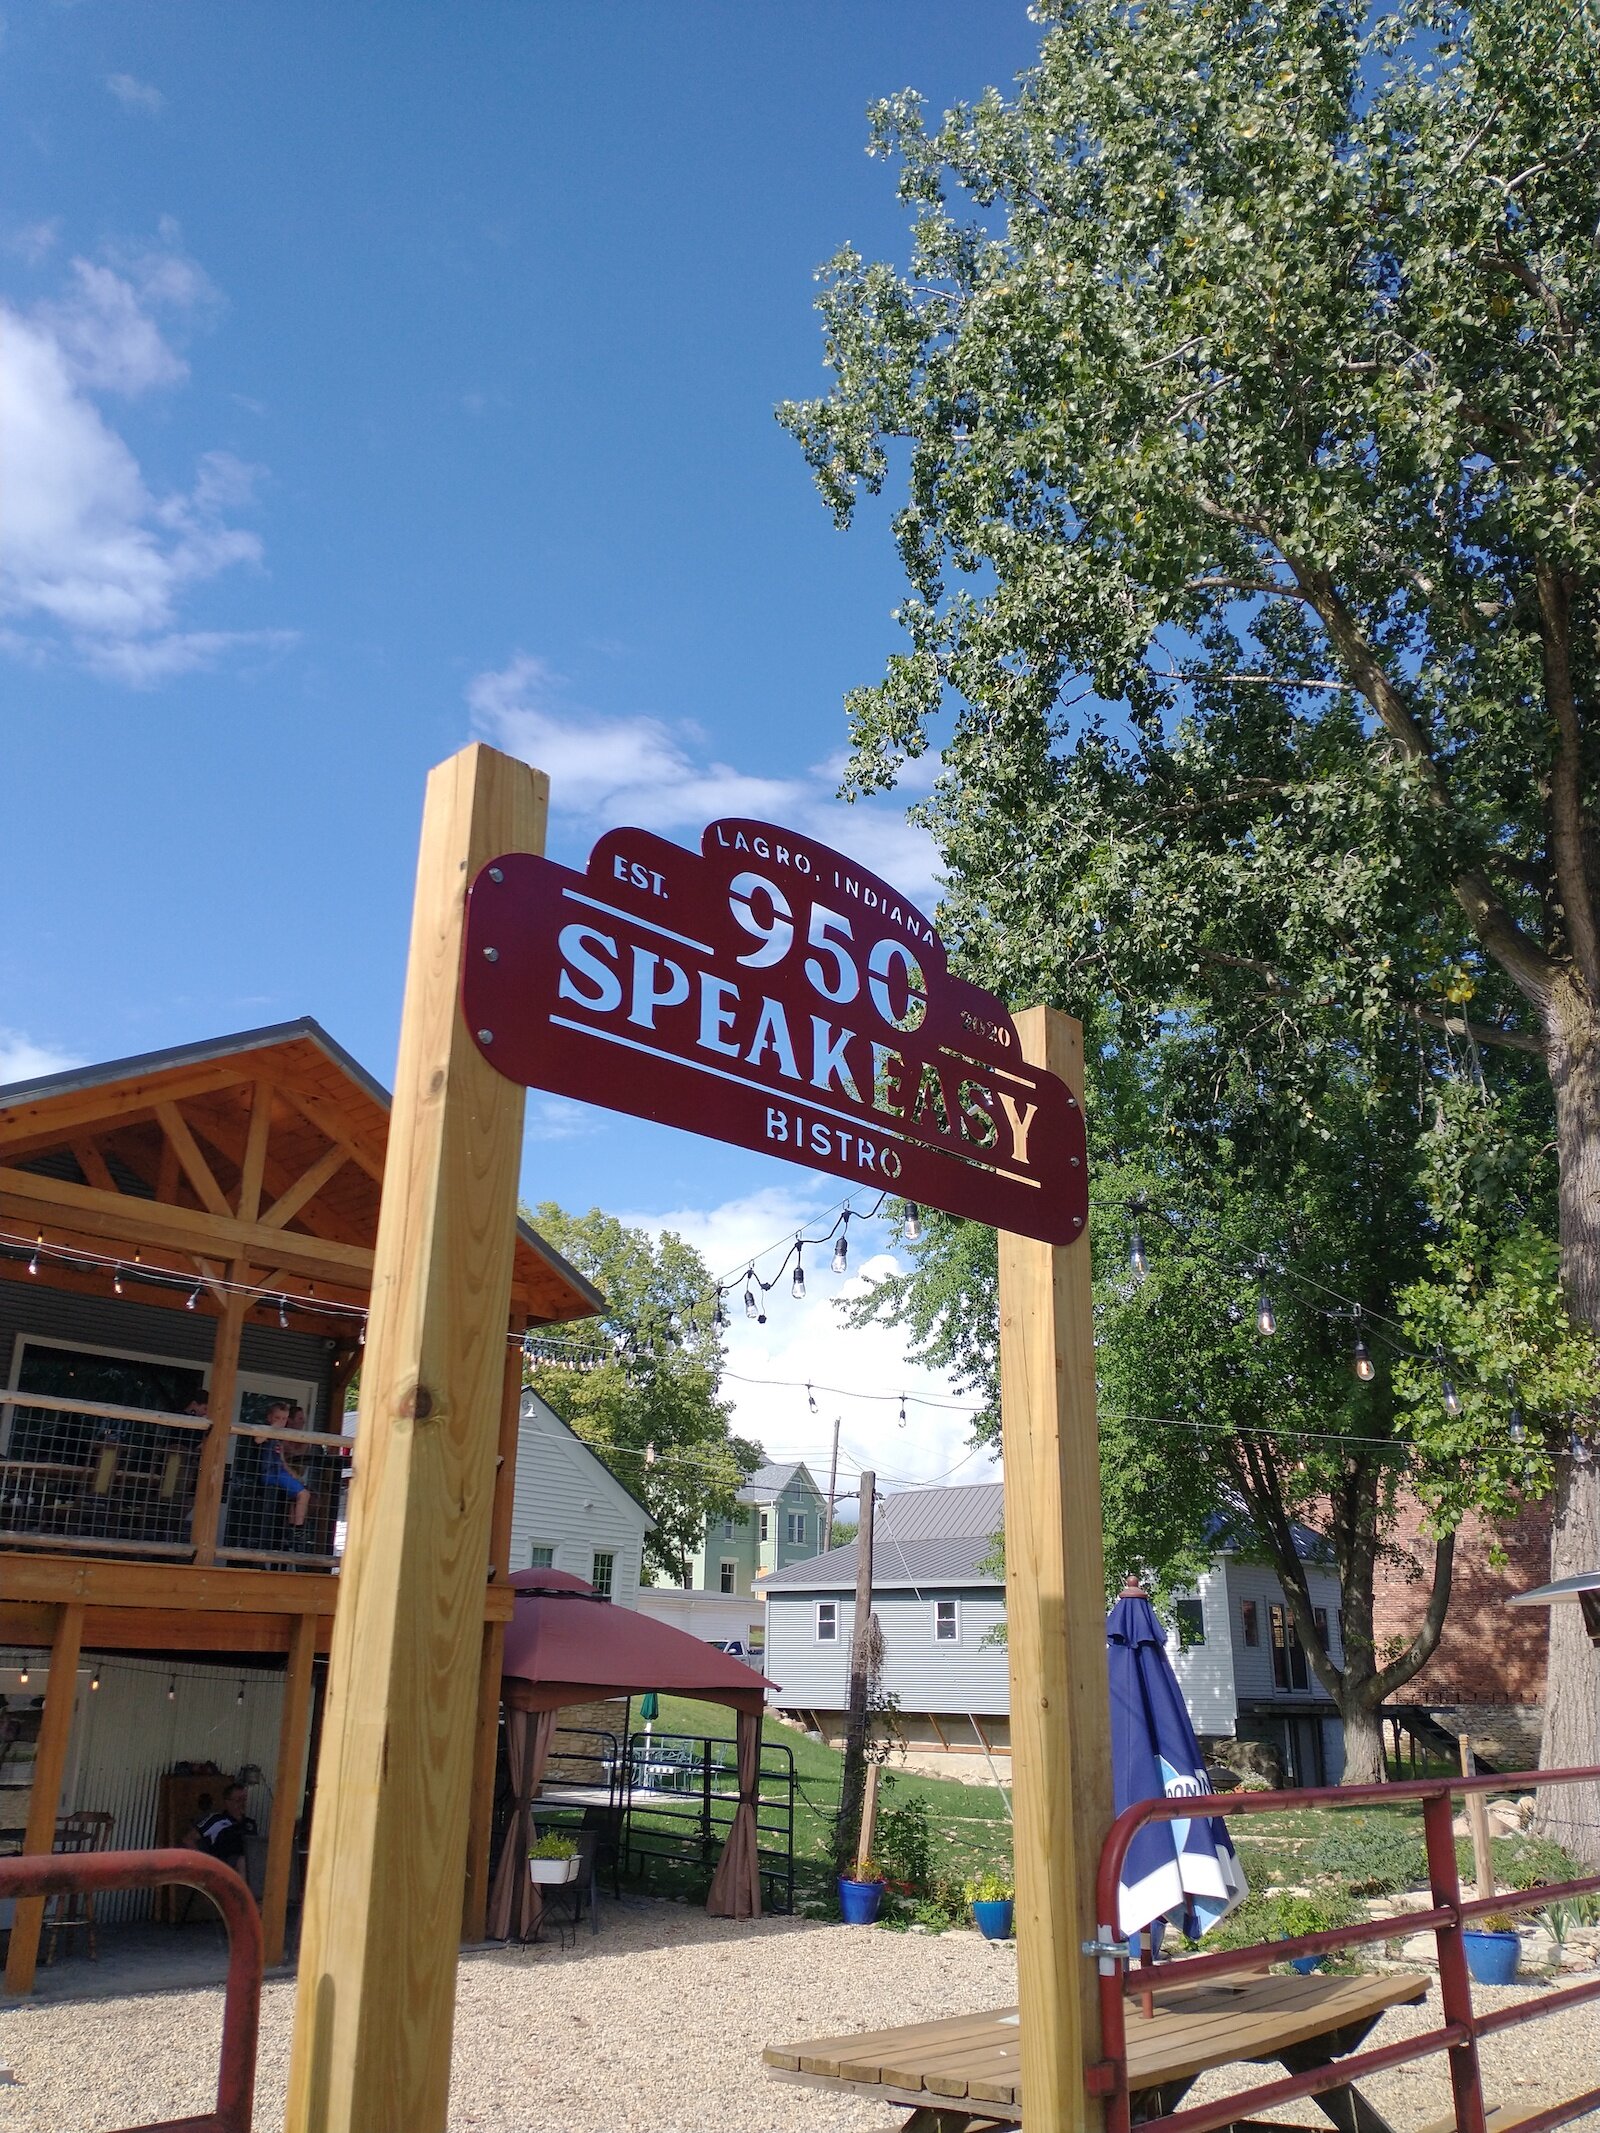 The 950 Speakeasy Bistro, a family-friendly eatery along the trail in Wabash County.